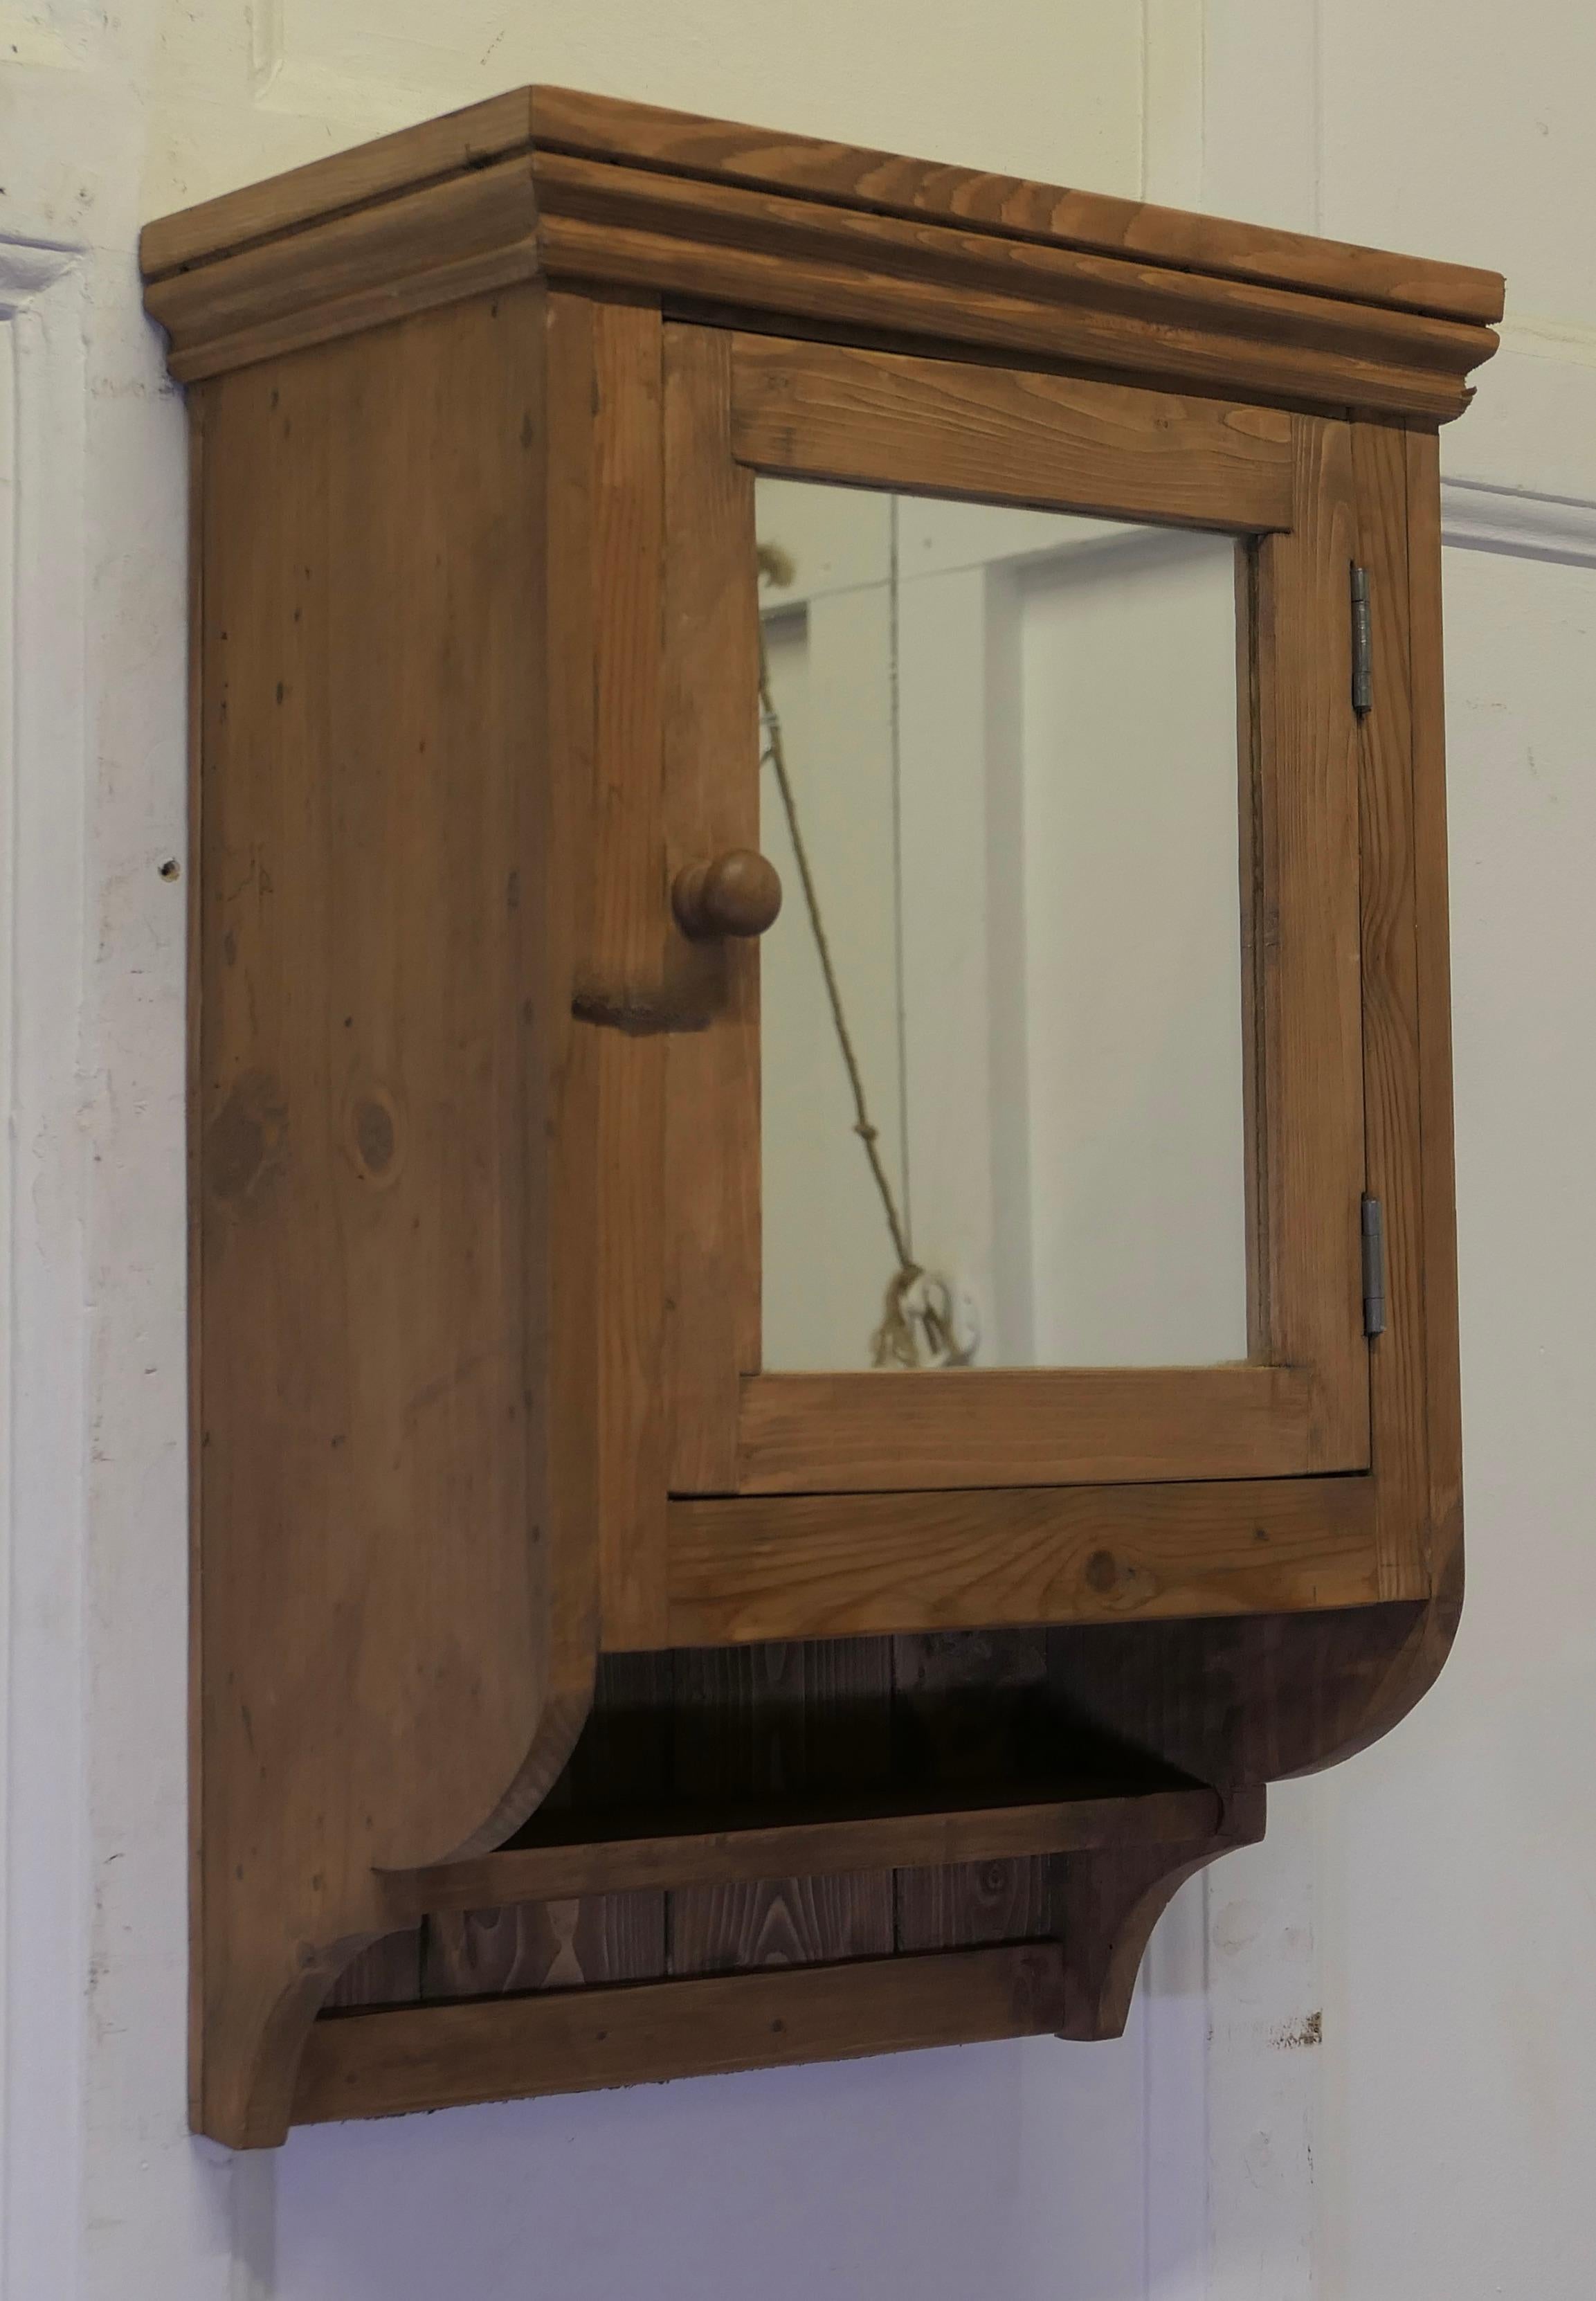 Wall Hanging Cloakroom or Bathroom Cupboard  

A very useful bathroom cabinet this wall hung shelved cupboard has mirrored door and a small shelf below 
It would work very well in a small Cloakroom where space is limited or in a traditional Bathroom